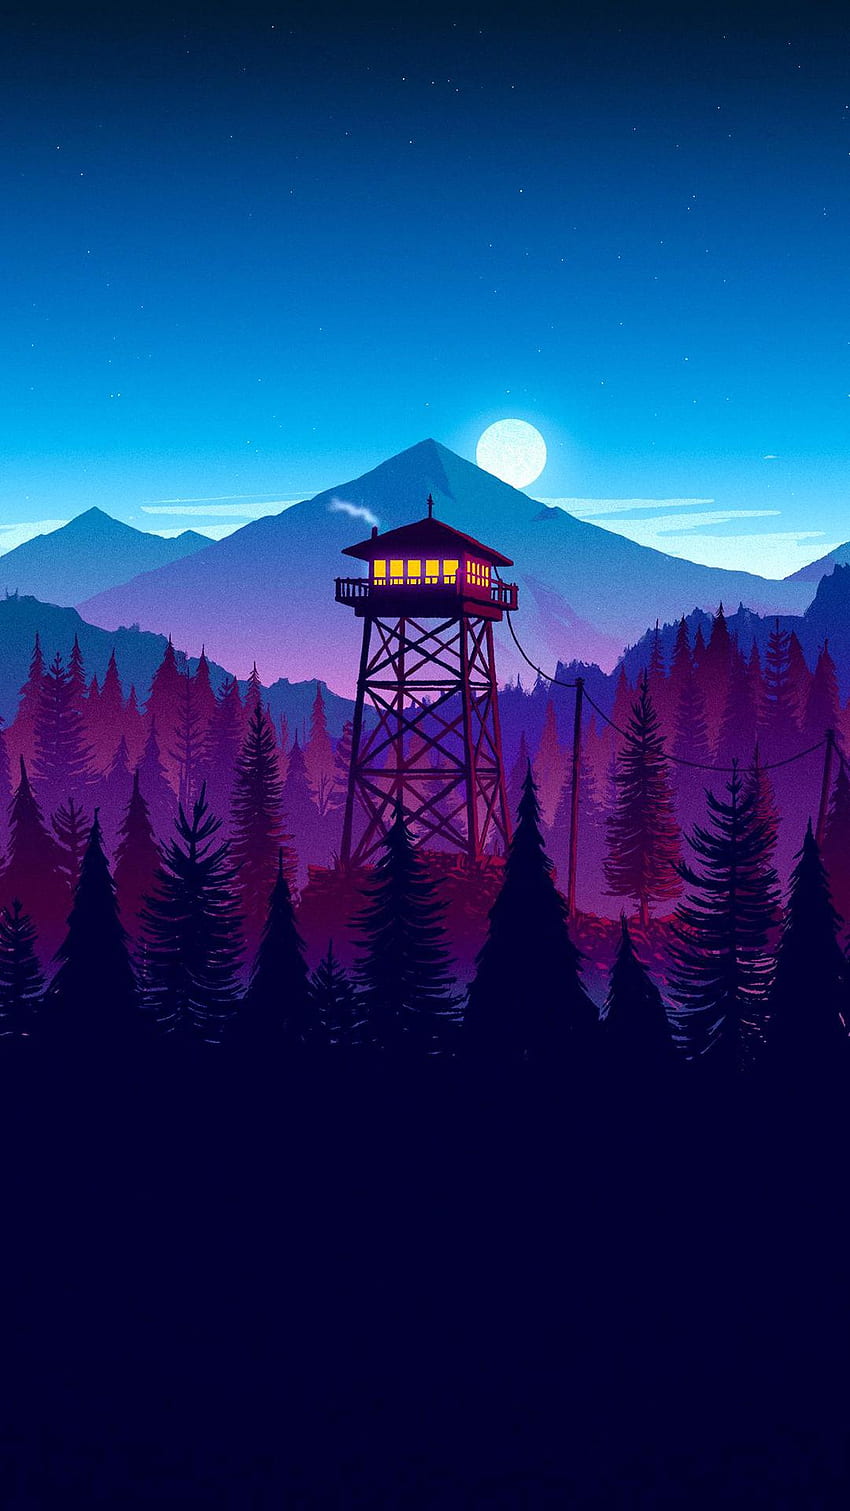 ( [9:16] [1080 X 1920] ) Works Great On Phones Or Portrait Monitors. Thanks To R hoprequest. : Firewatch, Cool Portrait HD phone wallpaper